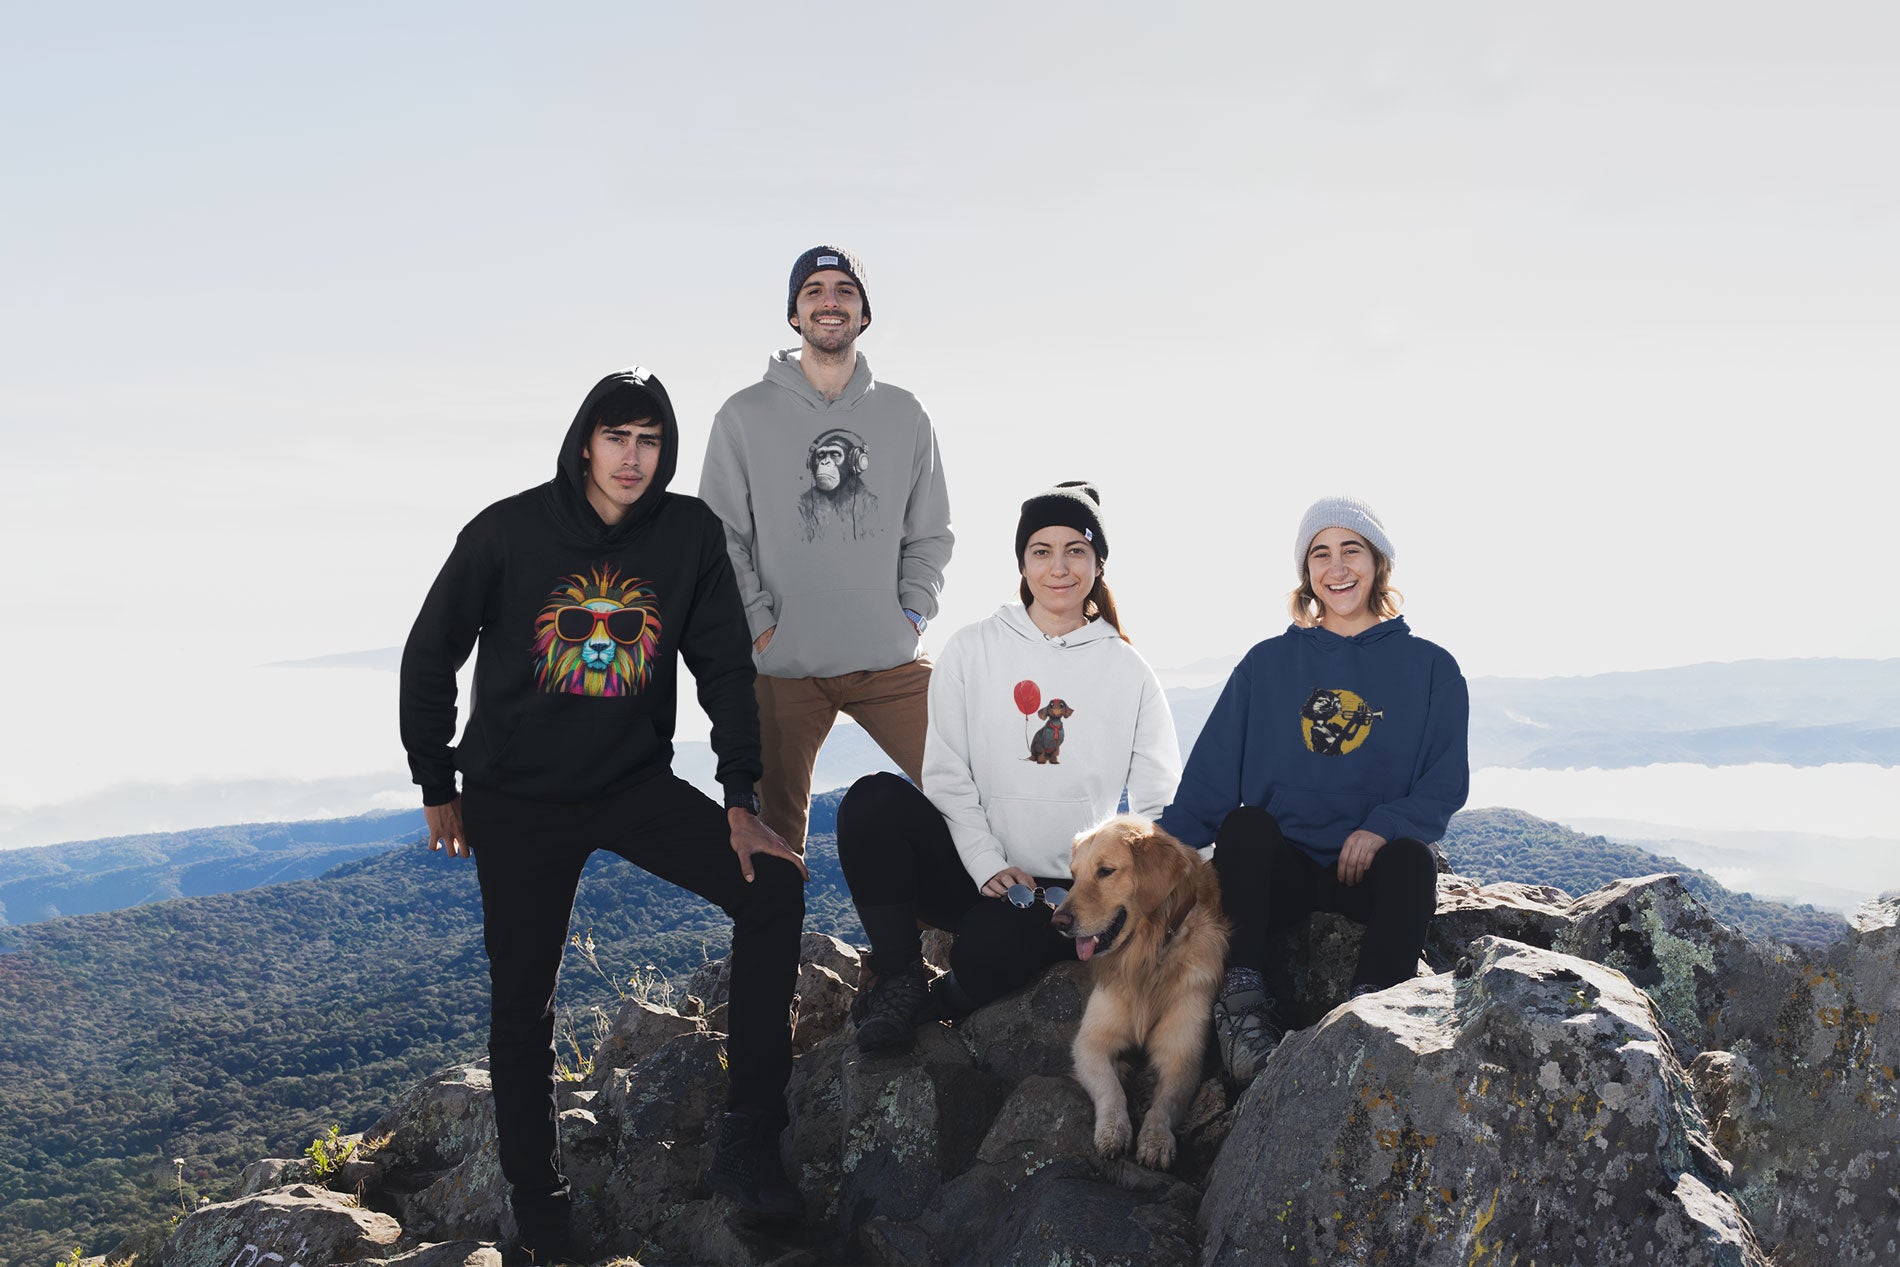 A group of friends with a dog on a mountain wearing some Hoodies designed by The Purple Melon